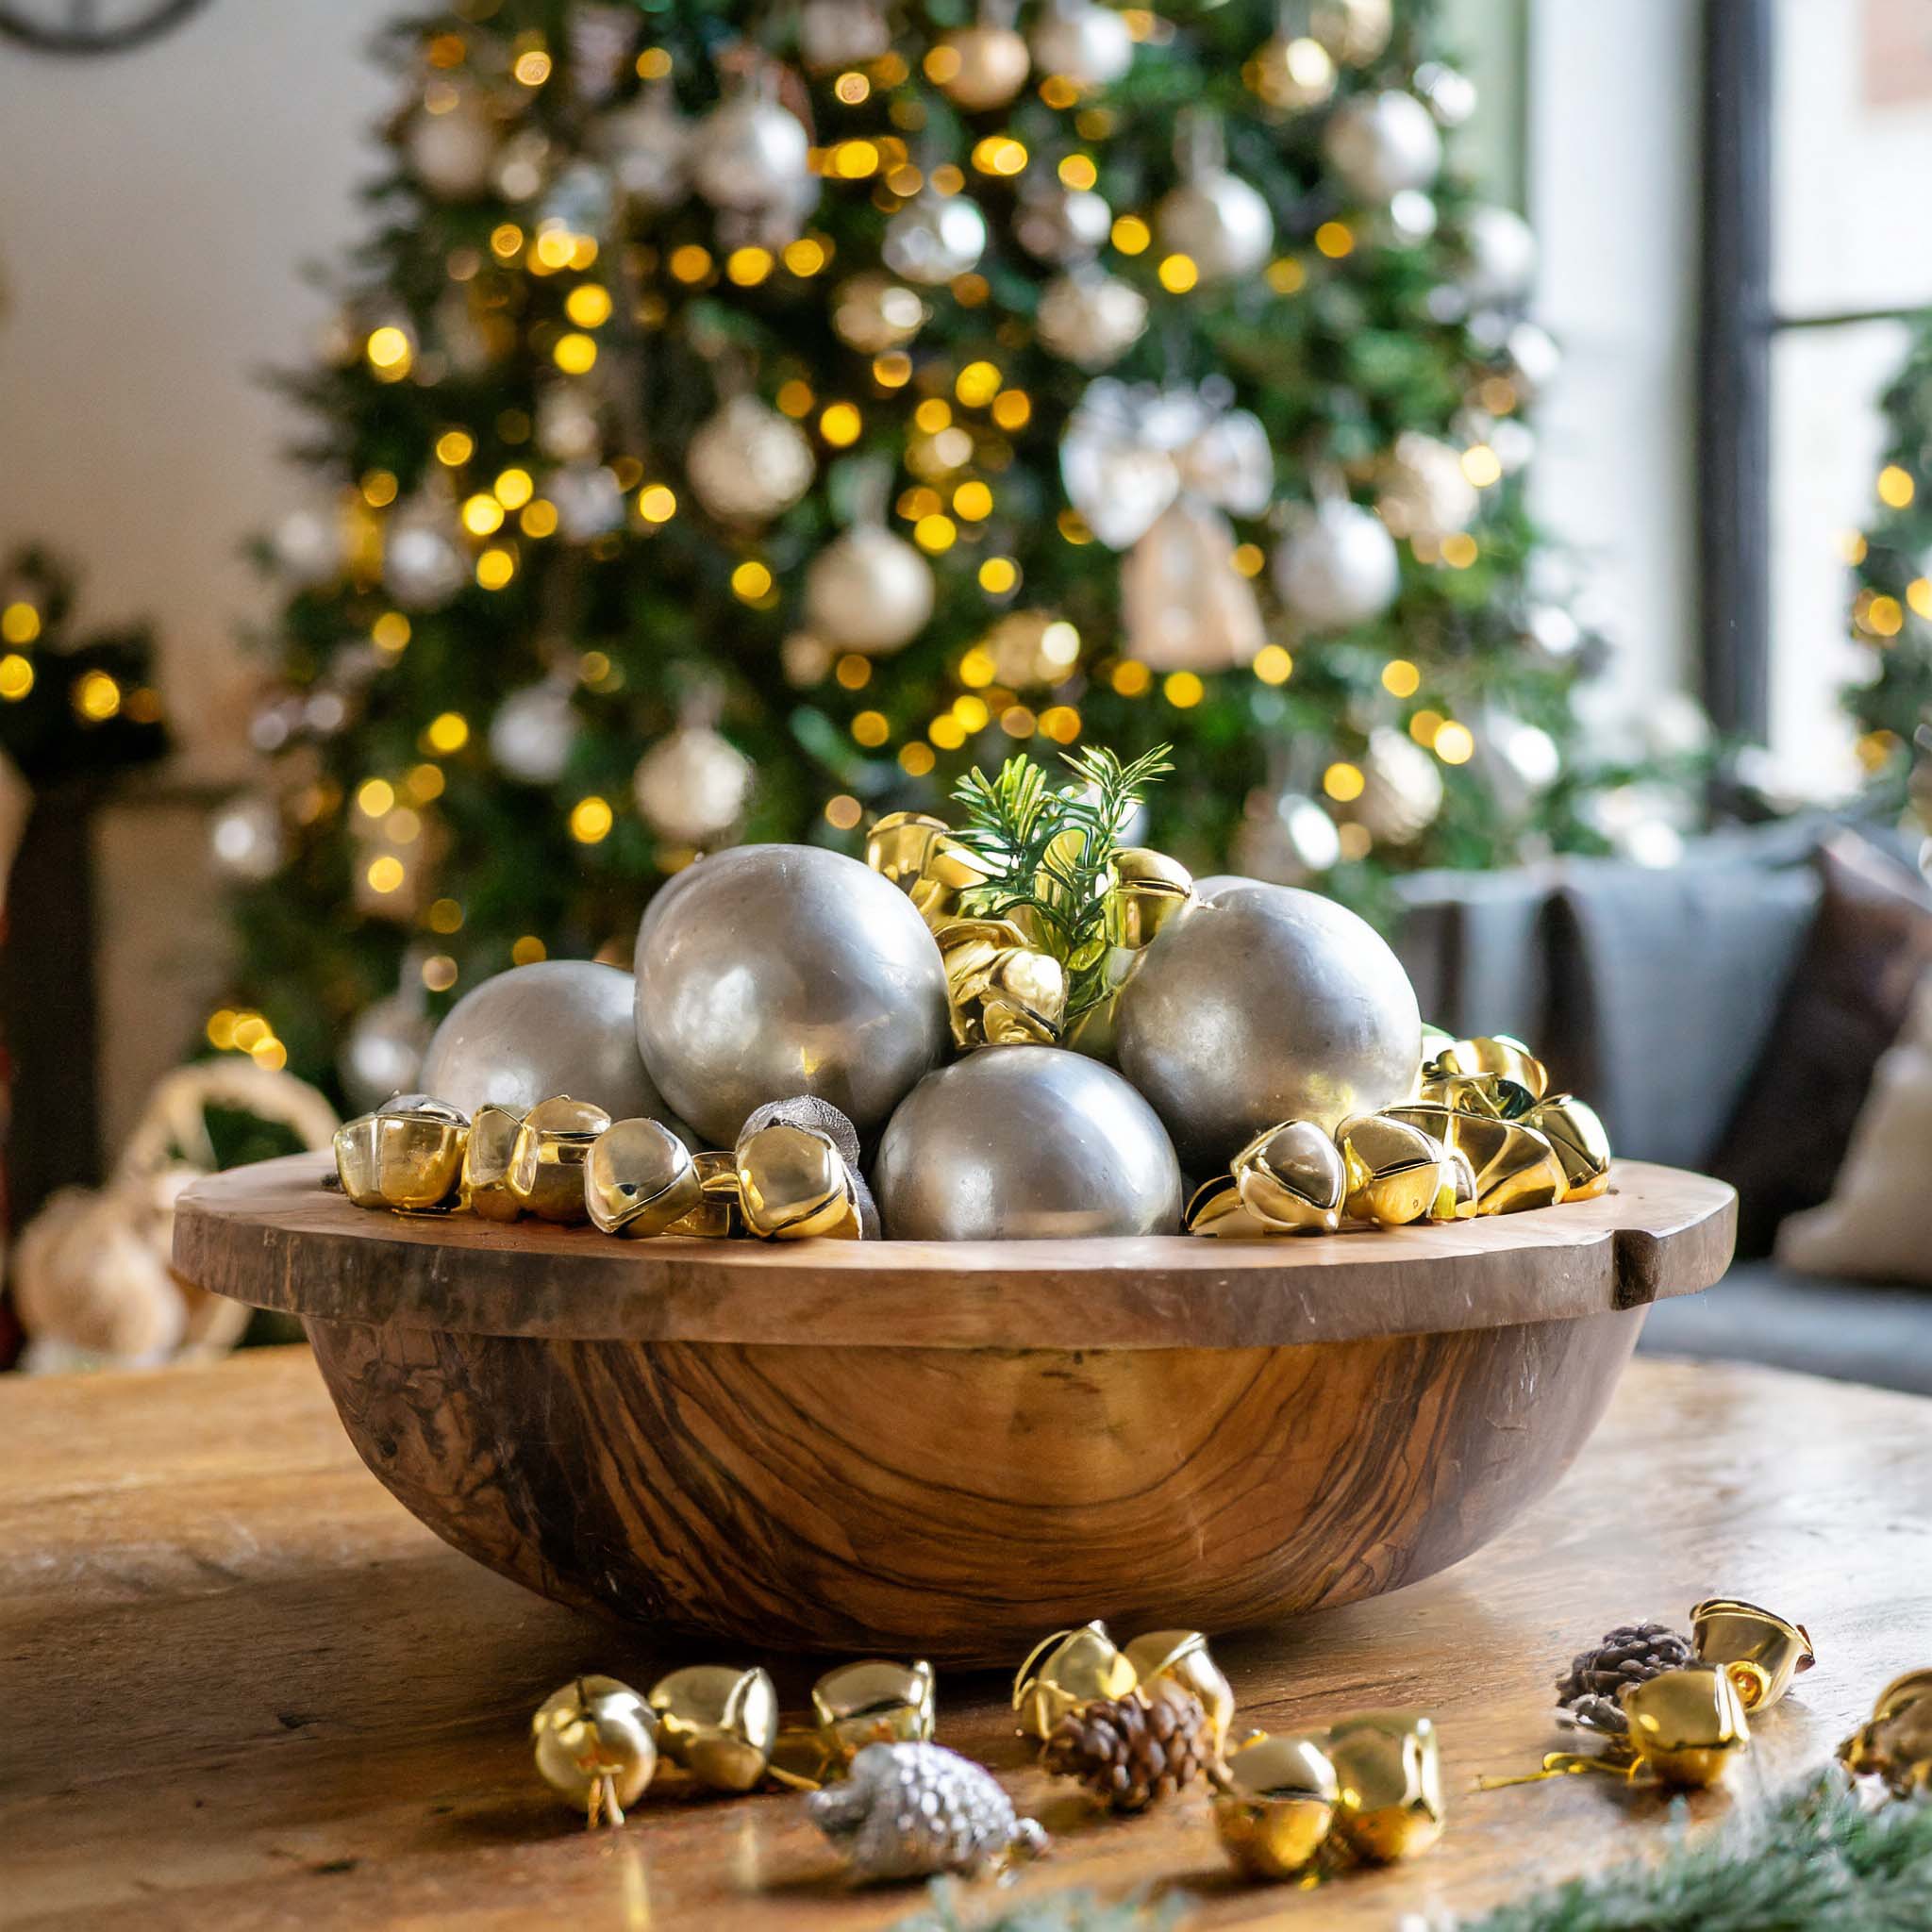 Wooden dough bowl filled with jingle bells and silver ornaments with Christmas tree in background.